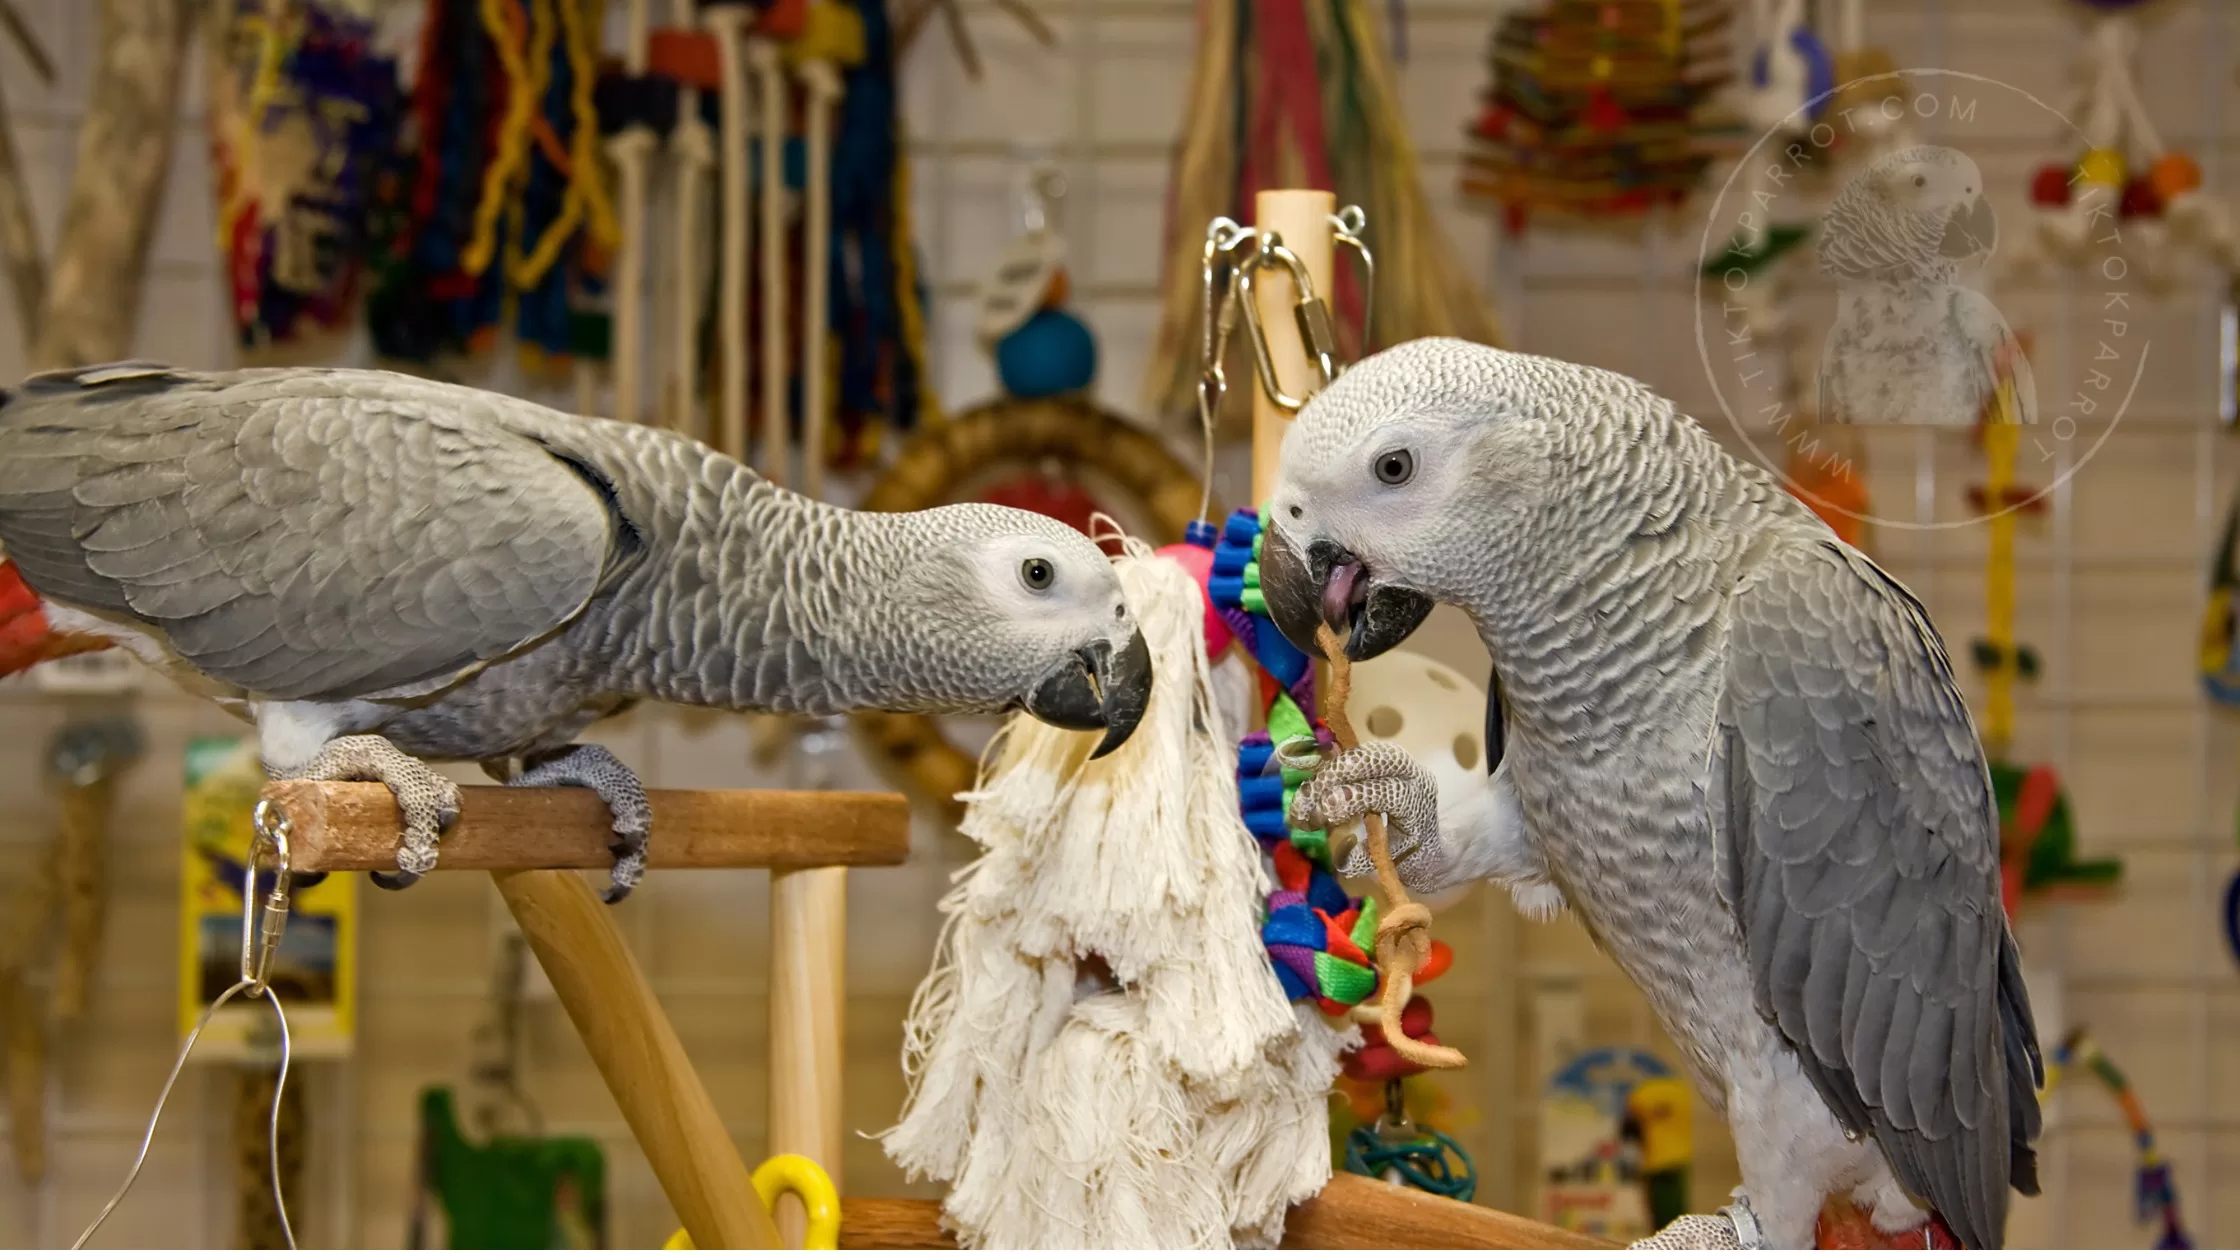 SPOIL YOUR PARROT WITH THESE AMAZING ACCESSORIES (TiktokParrot.com) African Grey Parrot Website